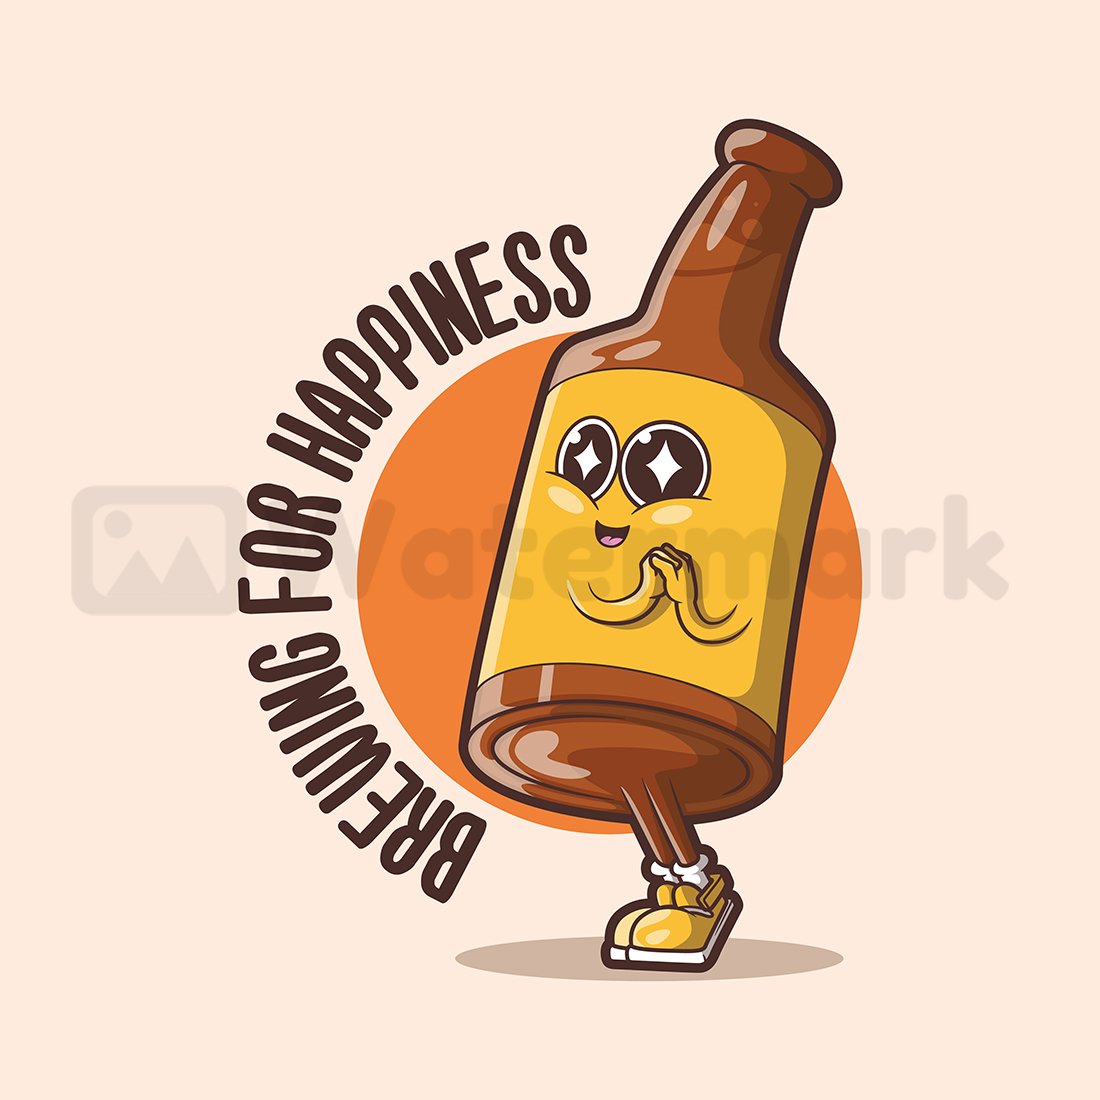 Brewing for Happiness! cover image.